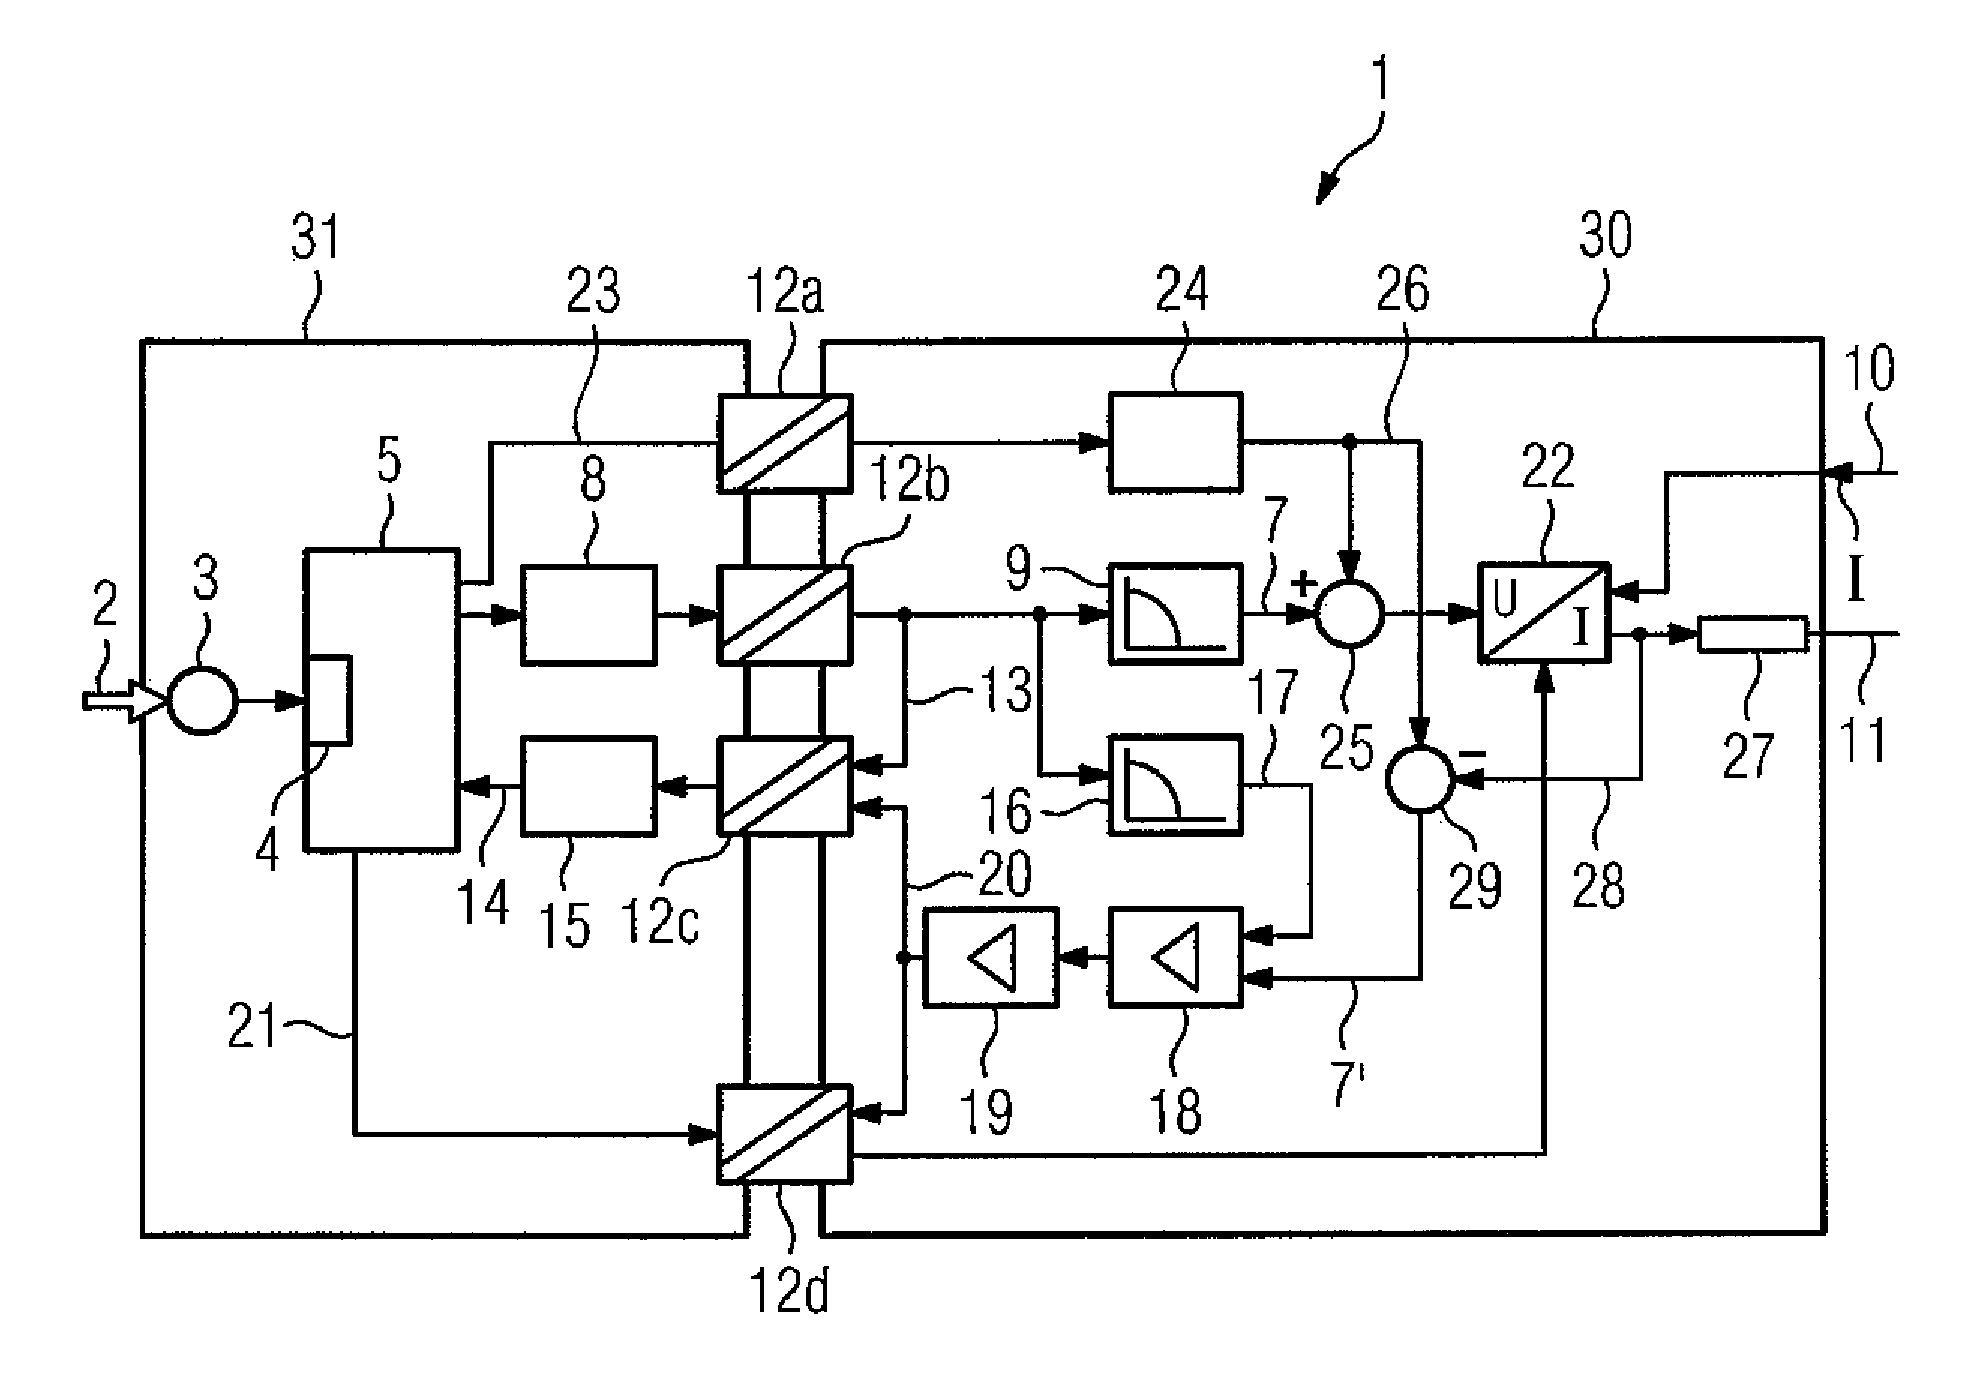 Field device for process instrumentation